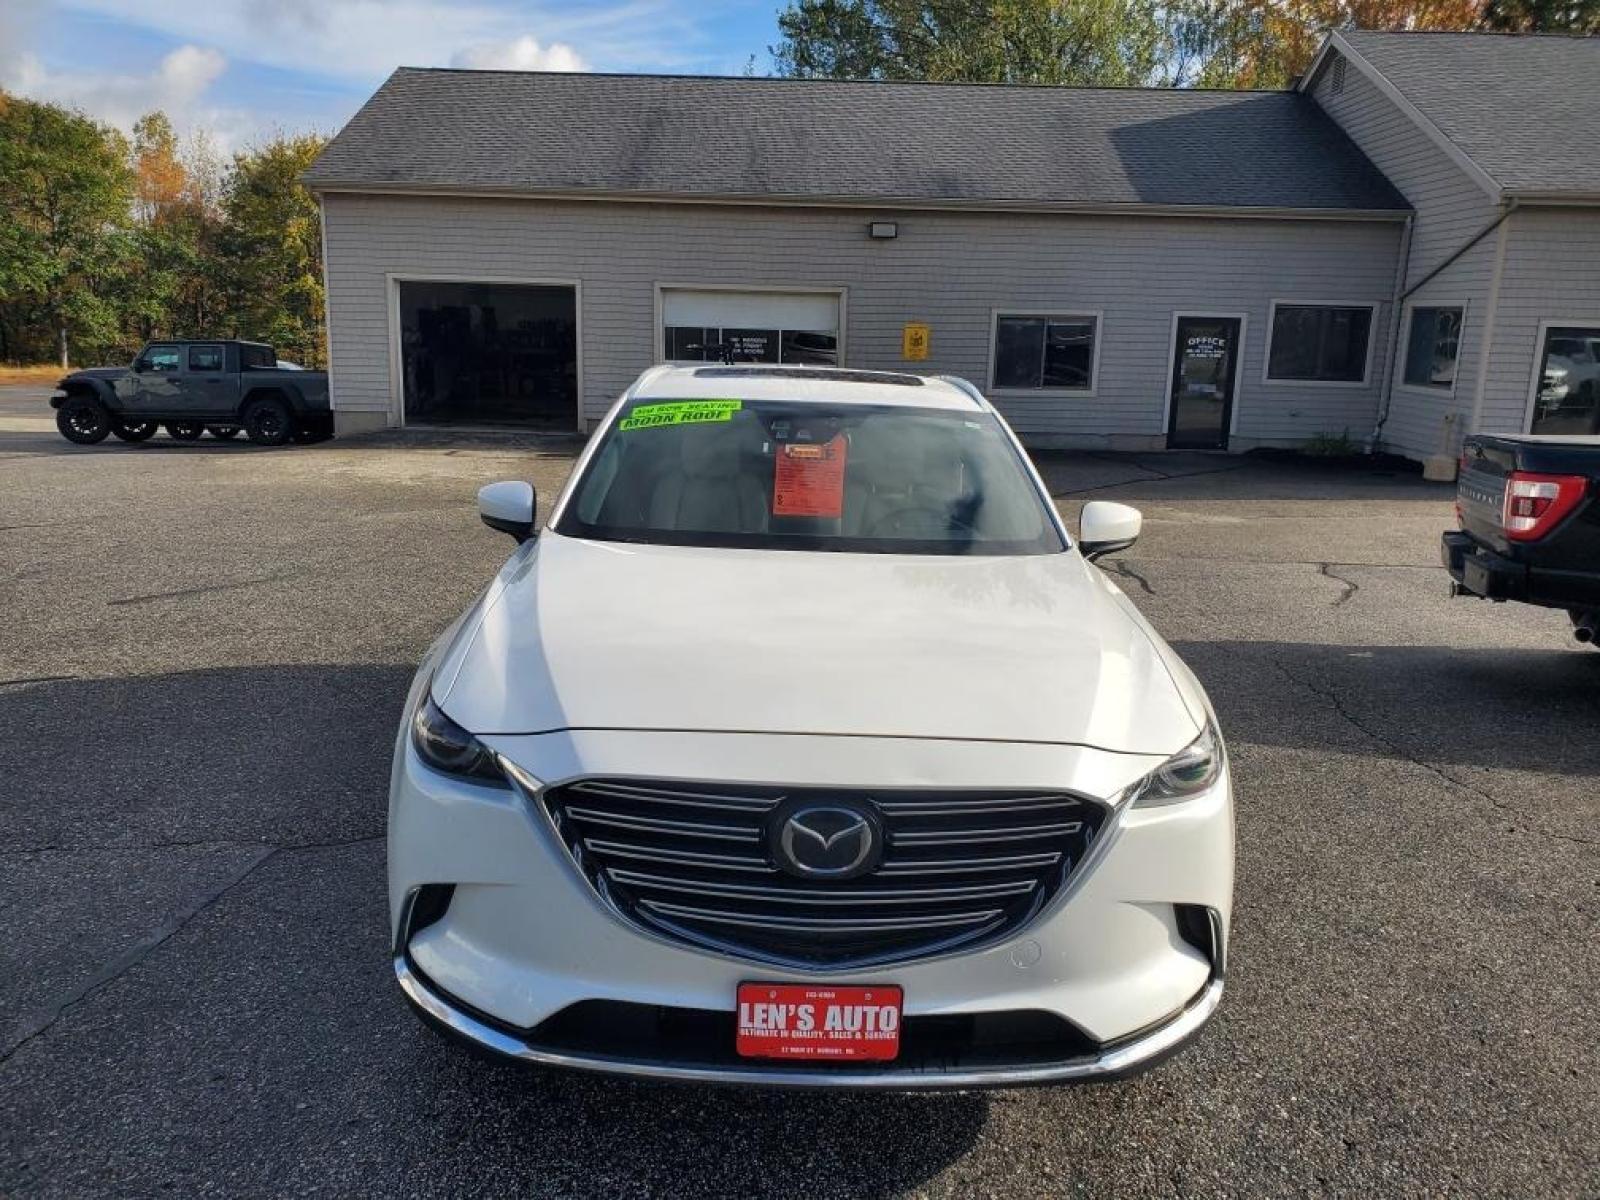 2017 Mazda CX-9 , located at 27 Main St., Norway, MD, 04268, (207) 743-0900, 44.199795, -70.530807 - 2017 Mazda CX-9 AWD 4cyl, At.Pw, Pl, Pm, Headed Seats, A/C, Cd, Cruise,Nav, Sunroof, 3rd row seat, Loaded 123k,----------------------------------------------------------$16,995.00 - Photo #1